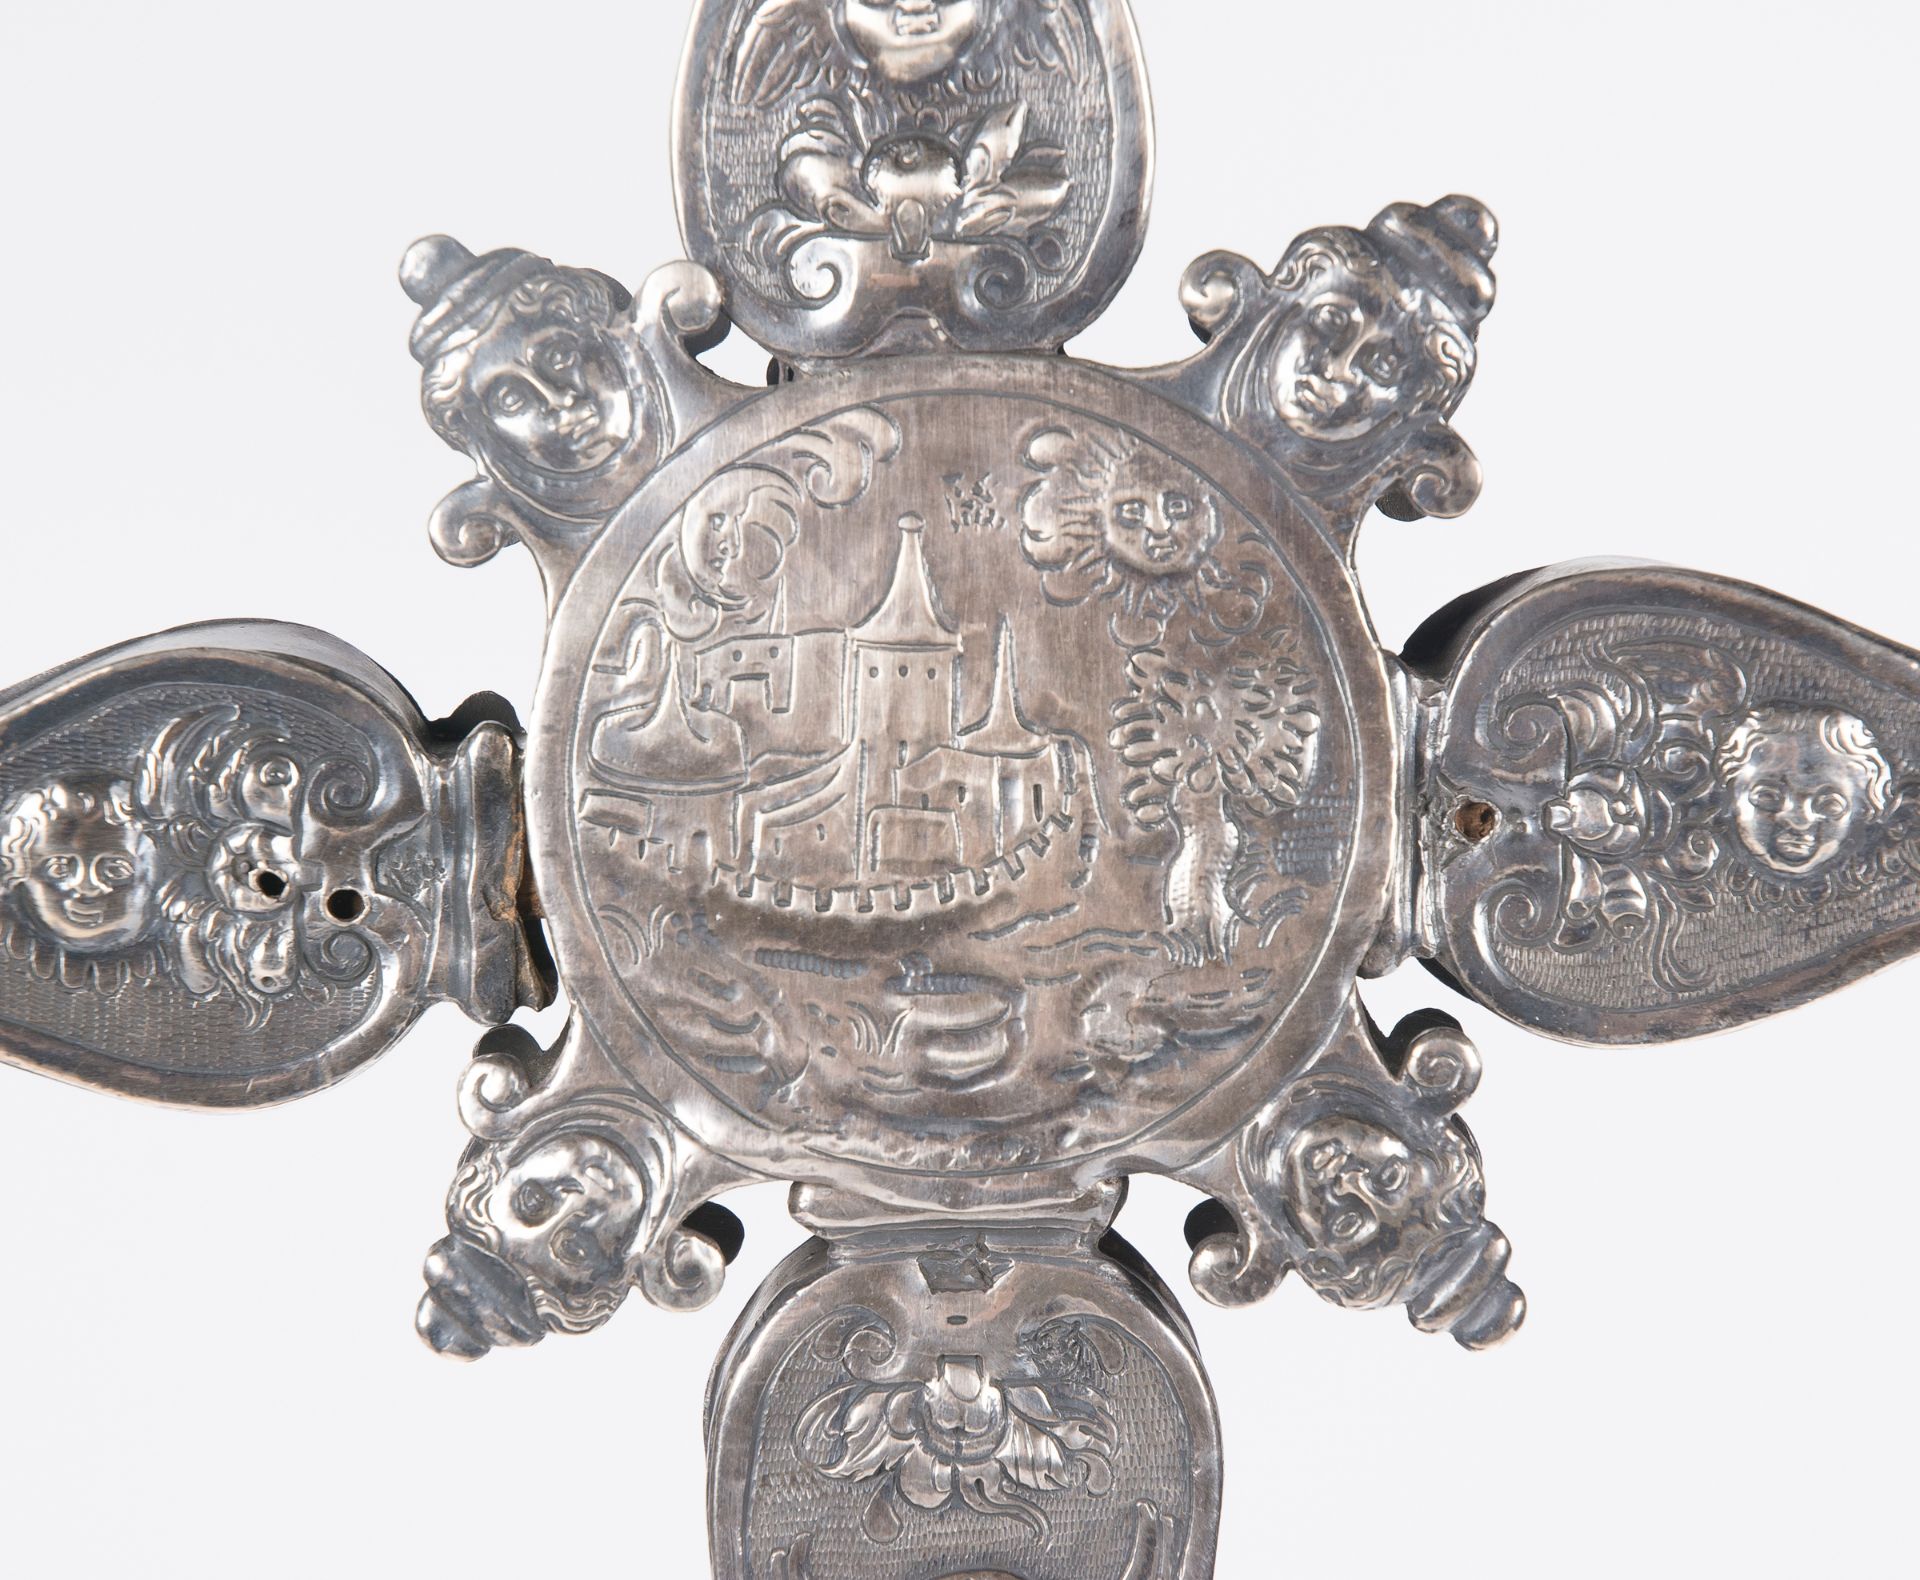 Large, chased silver processional cross. 16th century. - Image 8 of 14